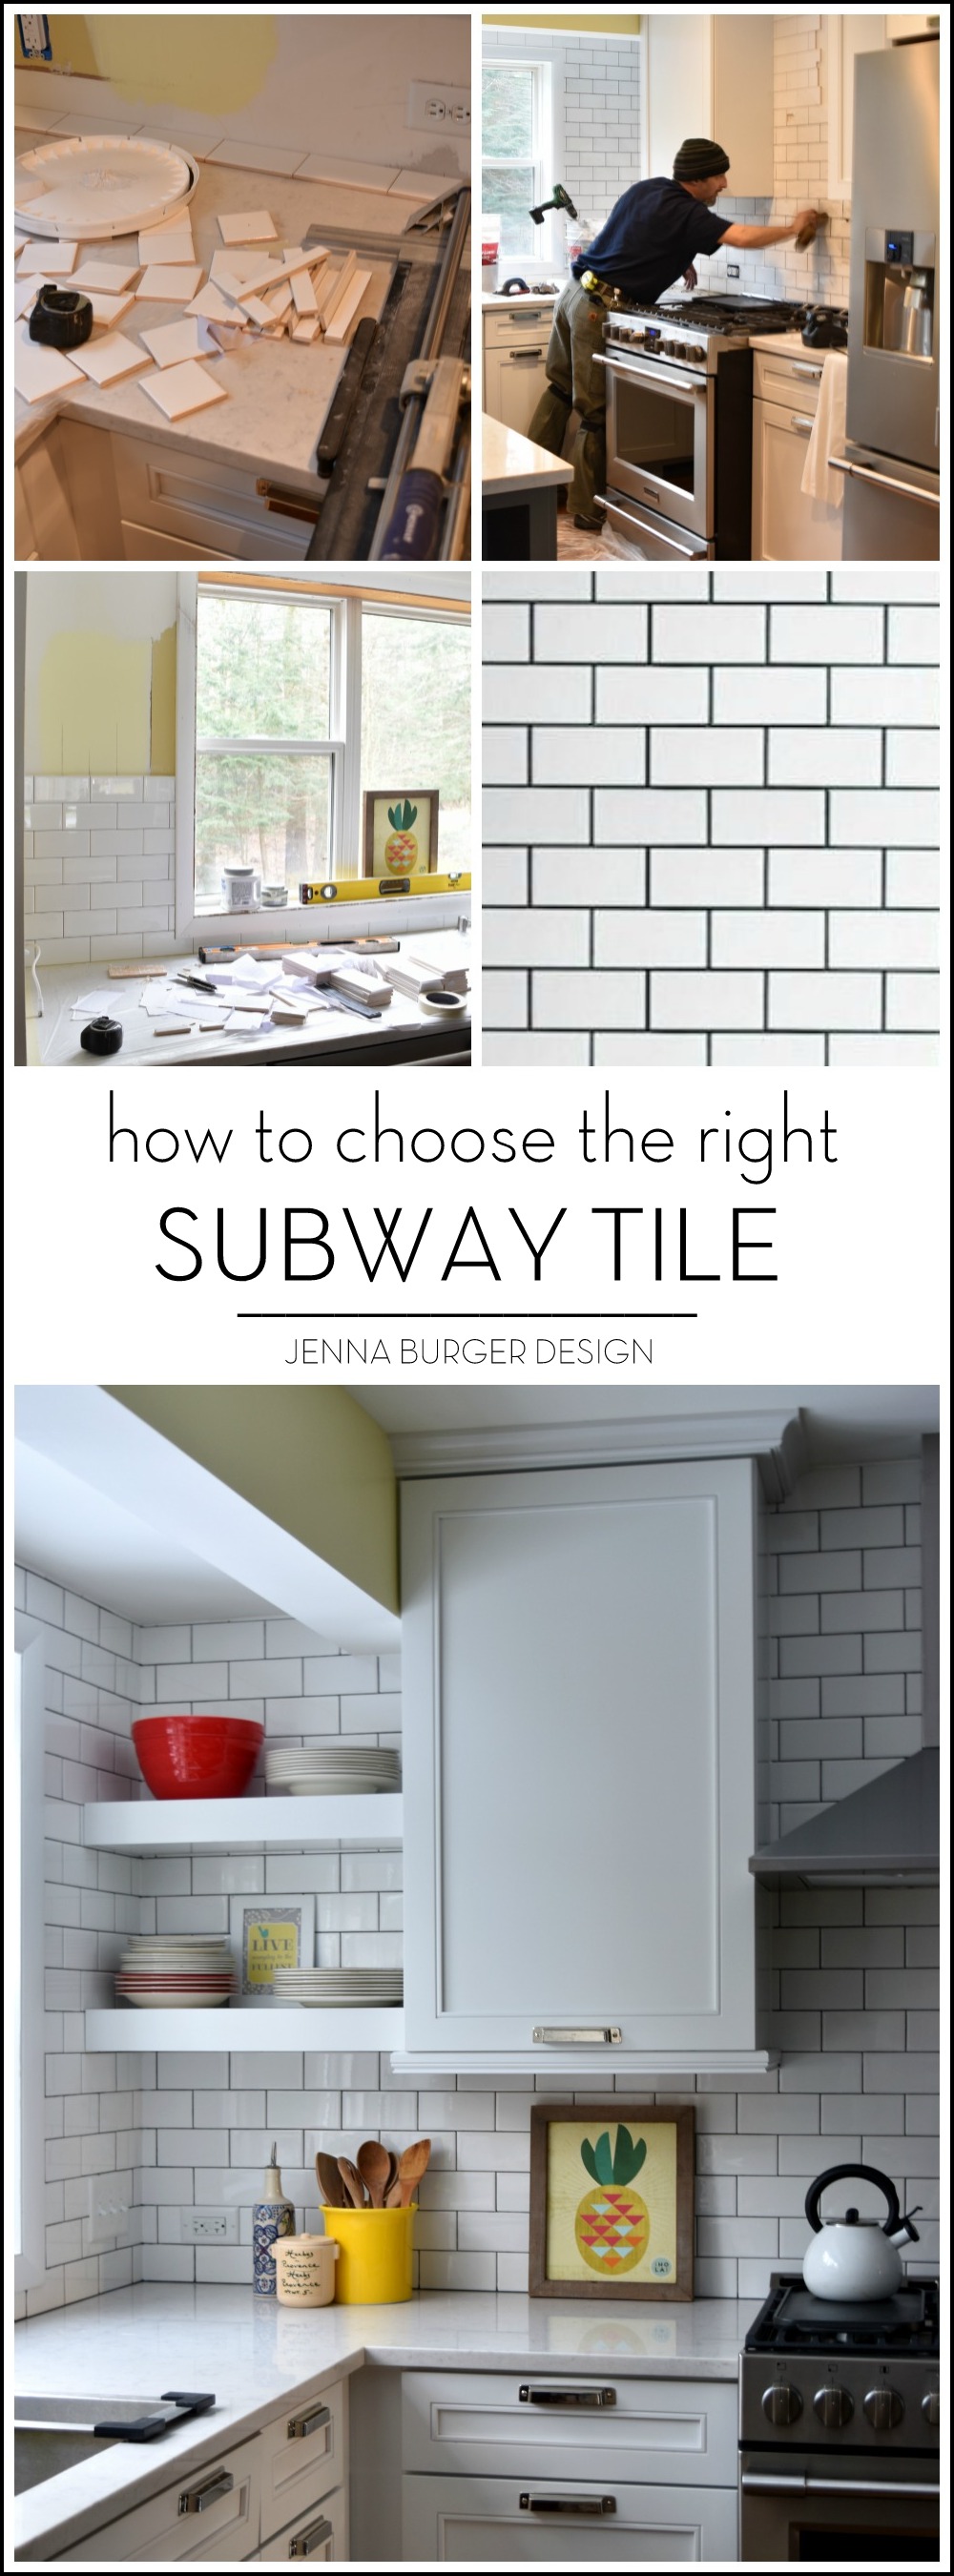 SUBWAY TILE: How do you choose the right subway tile for the project? There are MANY subway tile styles + colors. Here are useful tips that will help the process of choosing the right subway tile for the project. Plus check out the before and after of the tile installation of this kitchen remodel. www.JennaBurger.com 